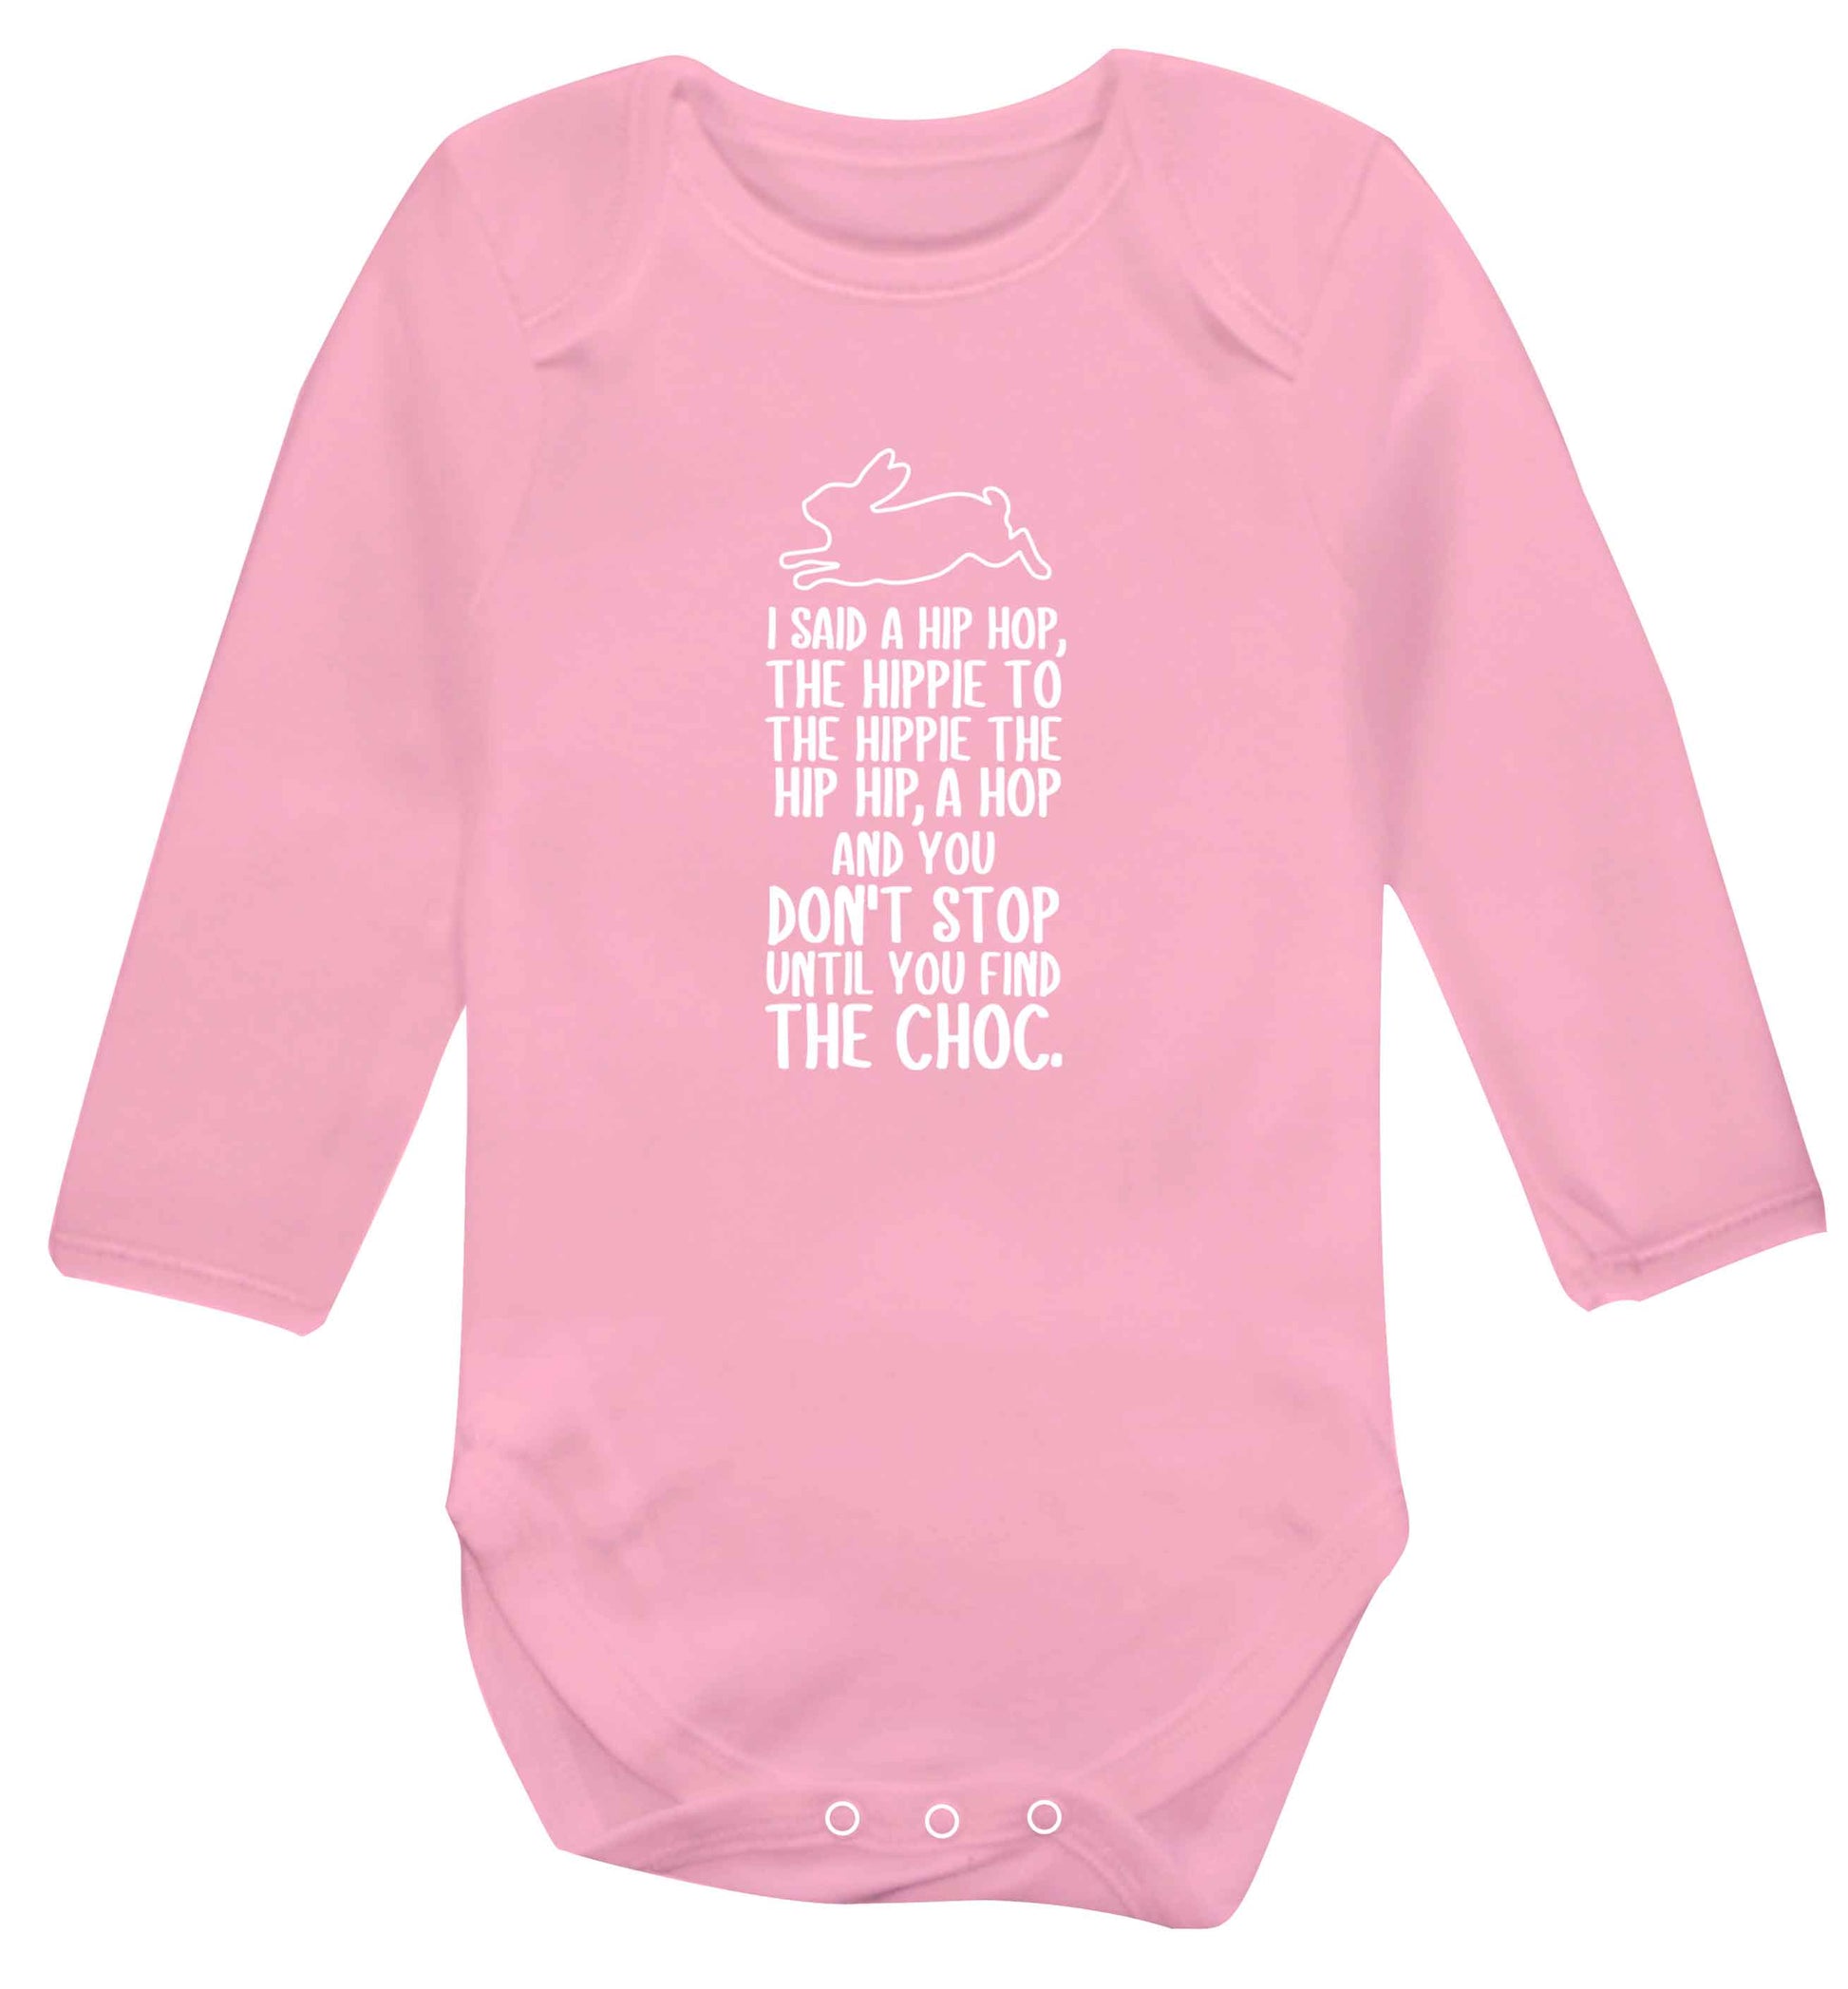 Don't stop until you find the choc baby vest long sleeved pale pink 6-12 months